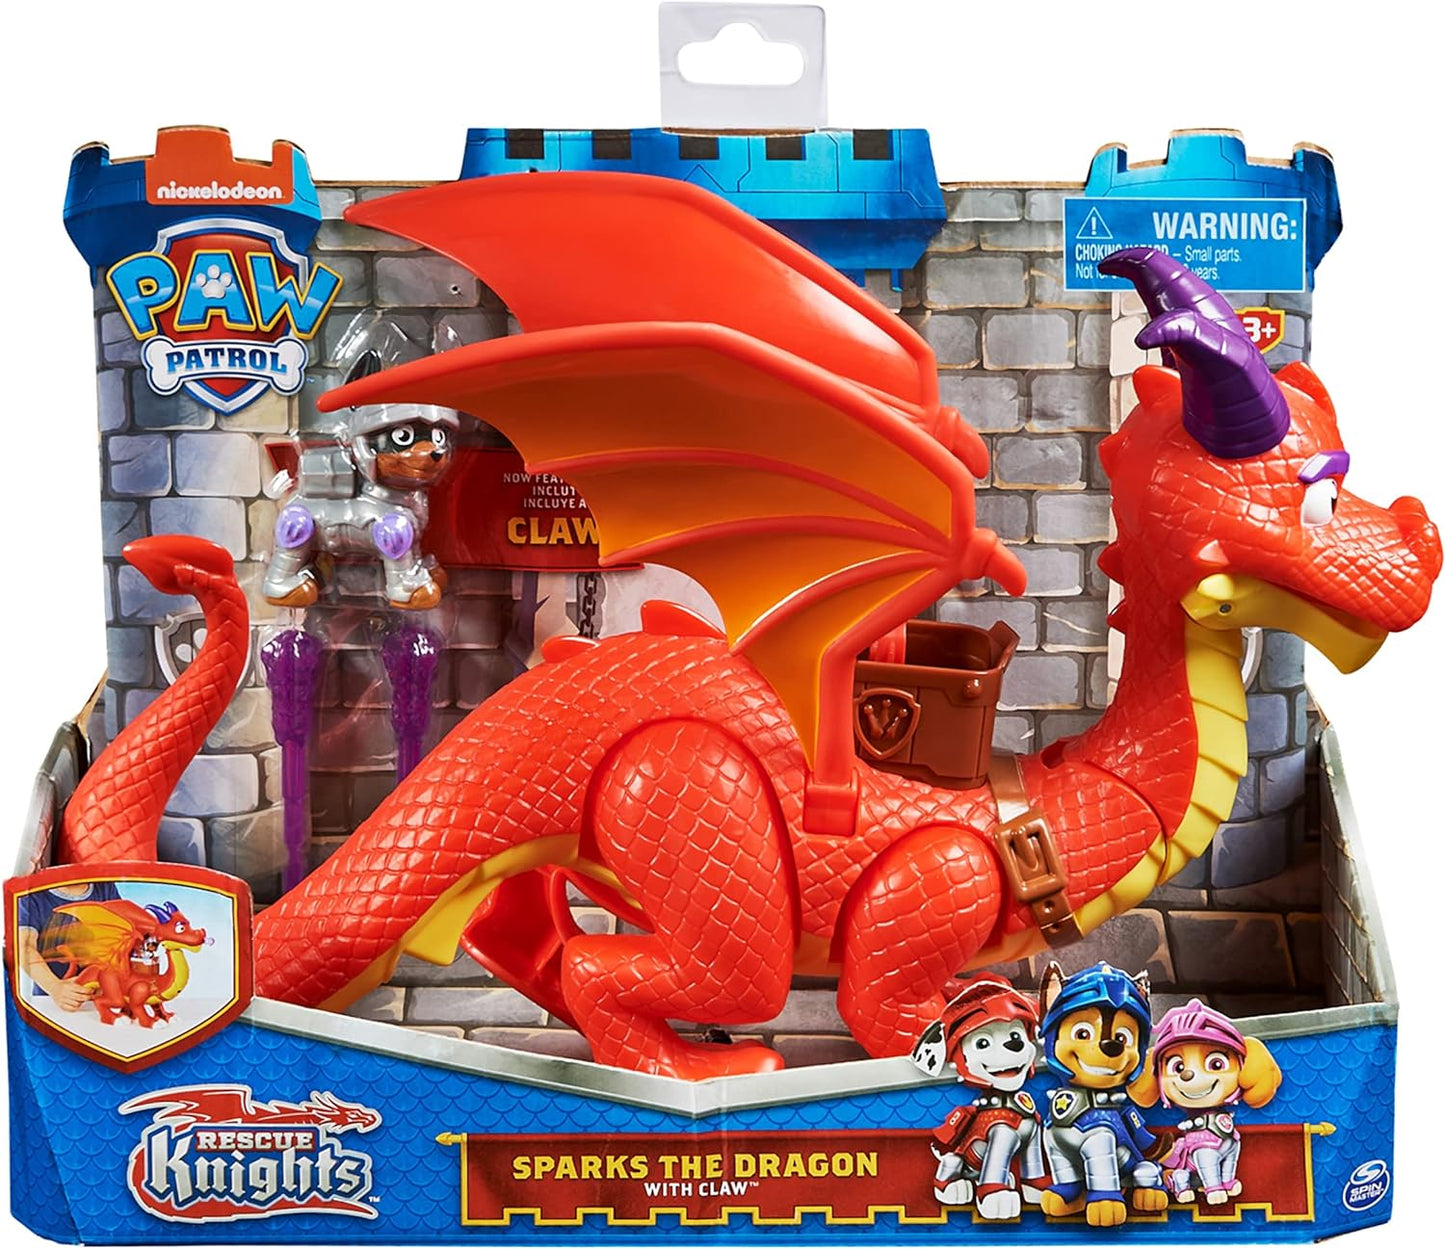 Paw Patrol - Rescue Knights Sparks The Dragon with Claw Action Figures